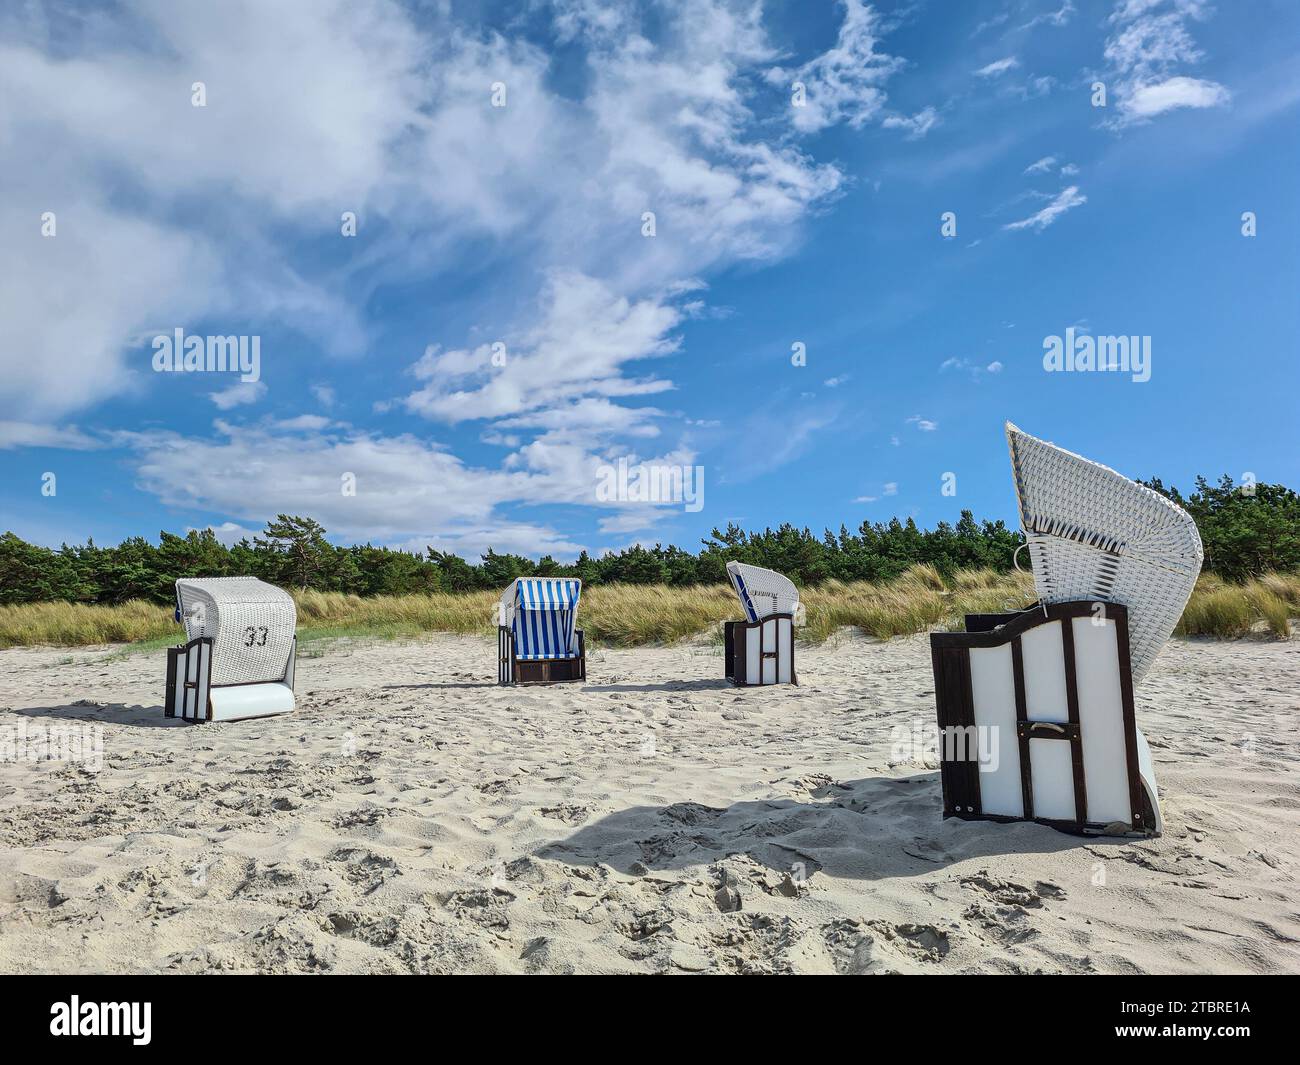 Blue sky with white fair weather clouds and beach chairs on sandy beach in Prerow, Baltic Sea, Fischland-Darß-Zingst peninsula, Mecklenburg-Western Pomerania, Germany Stock Photo